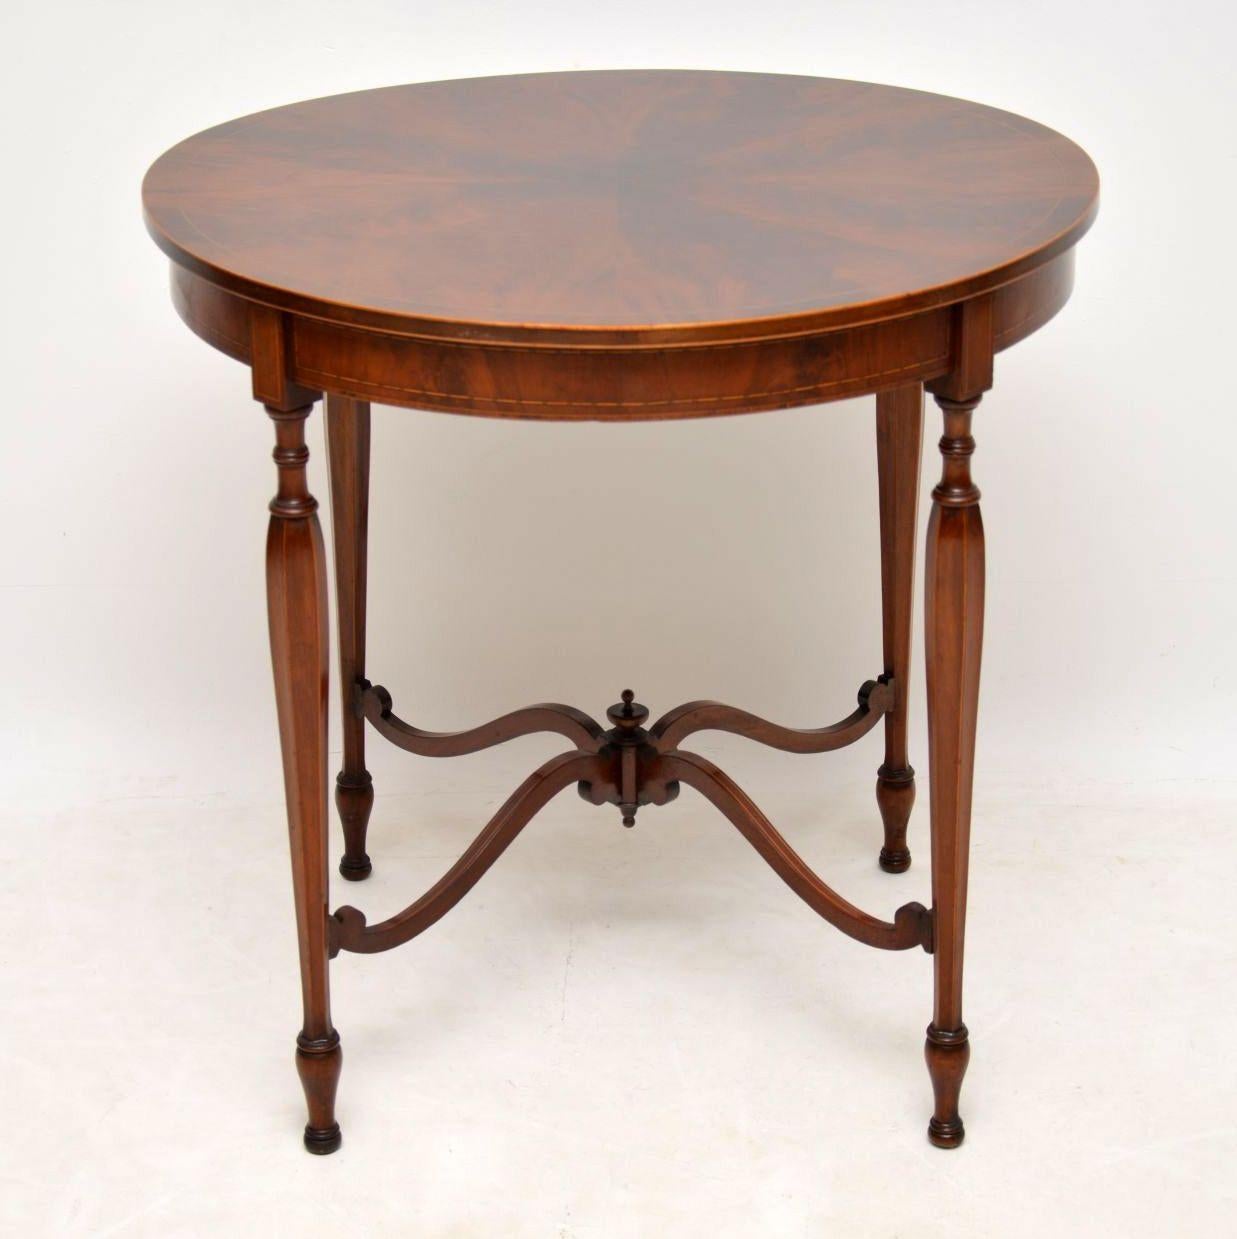 This mahogany table is fabulous quality and is in excellent original condition, with some fine details. It's antique Edwardian, dating from the 1890-1910 period. The top is spectacular and made up of segmented flame mahogany veneers, with fine